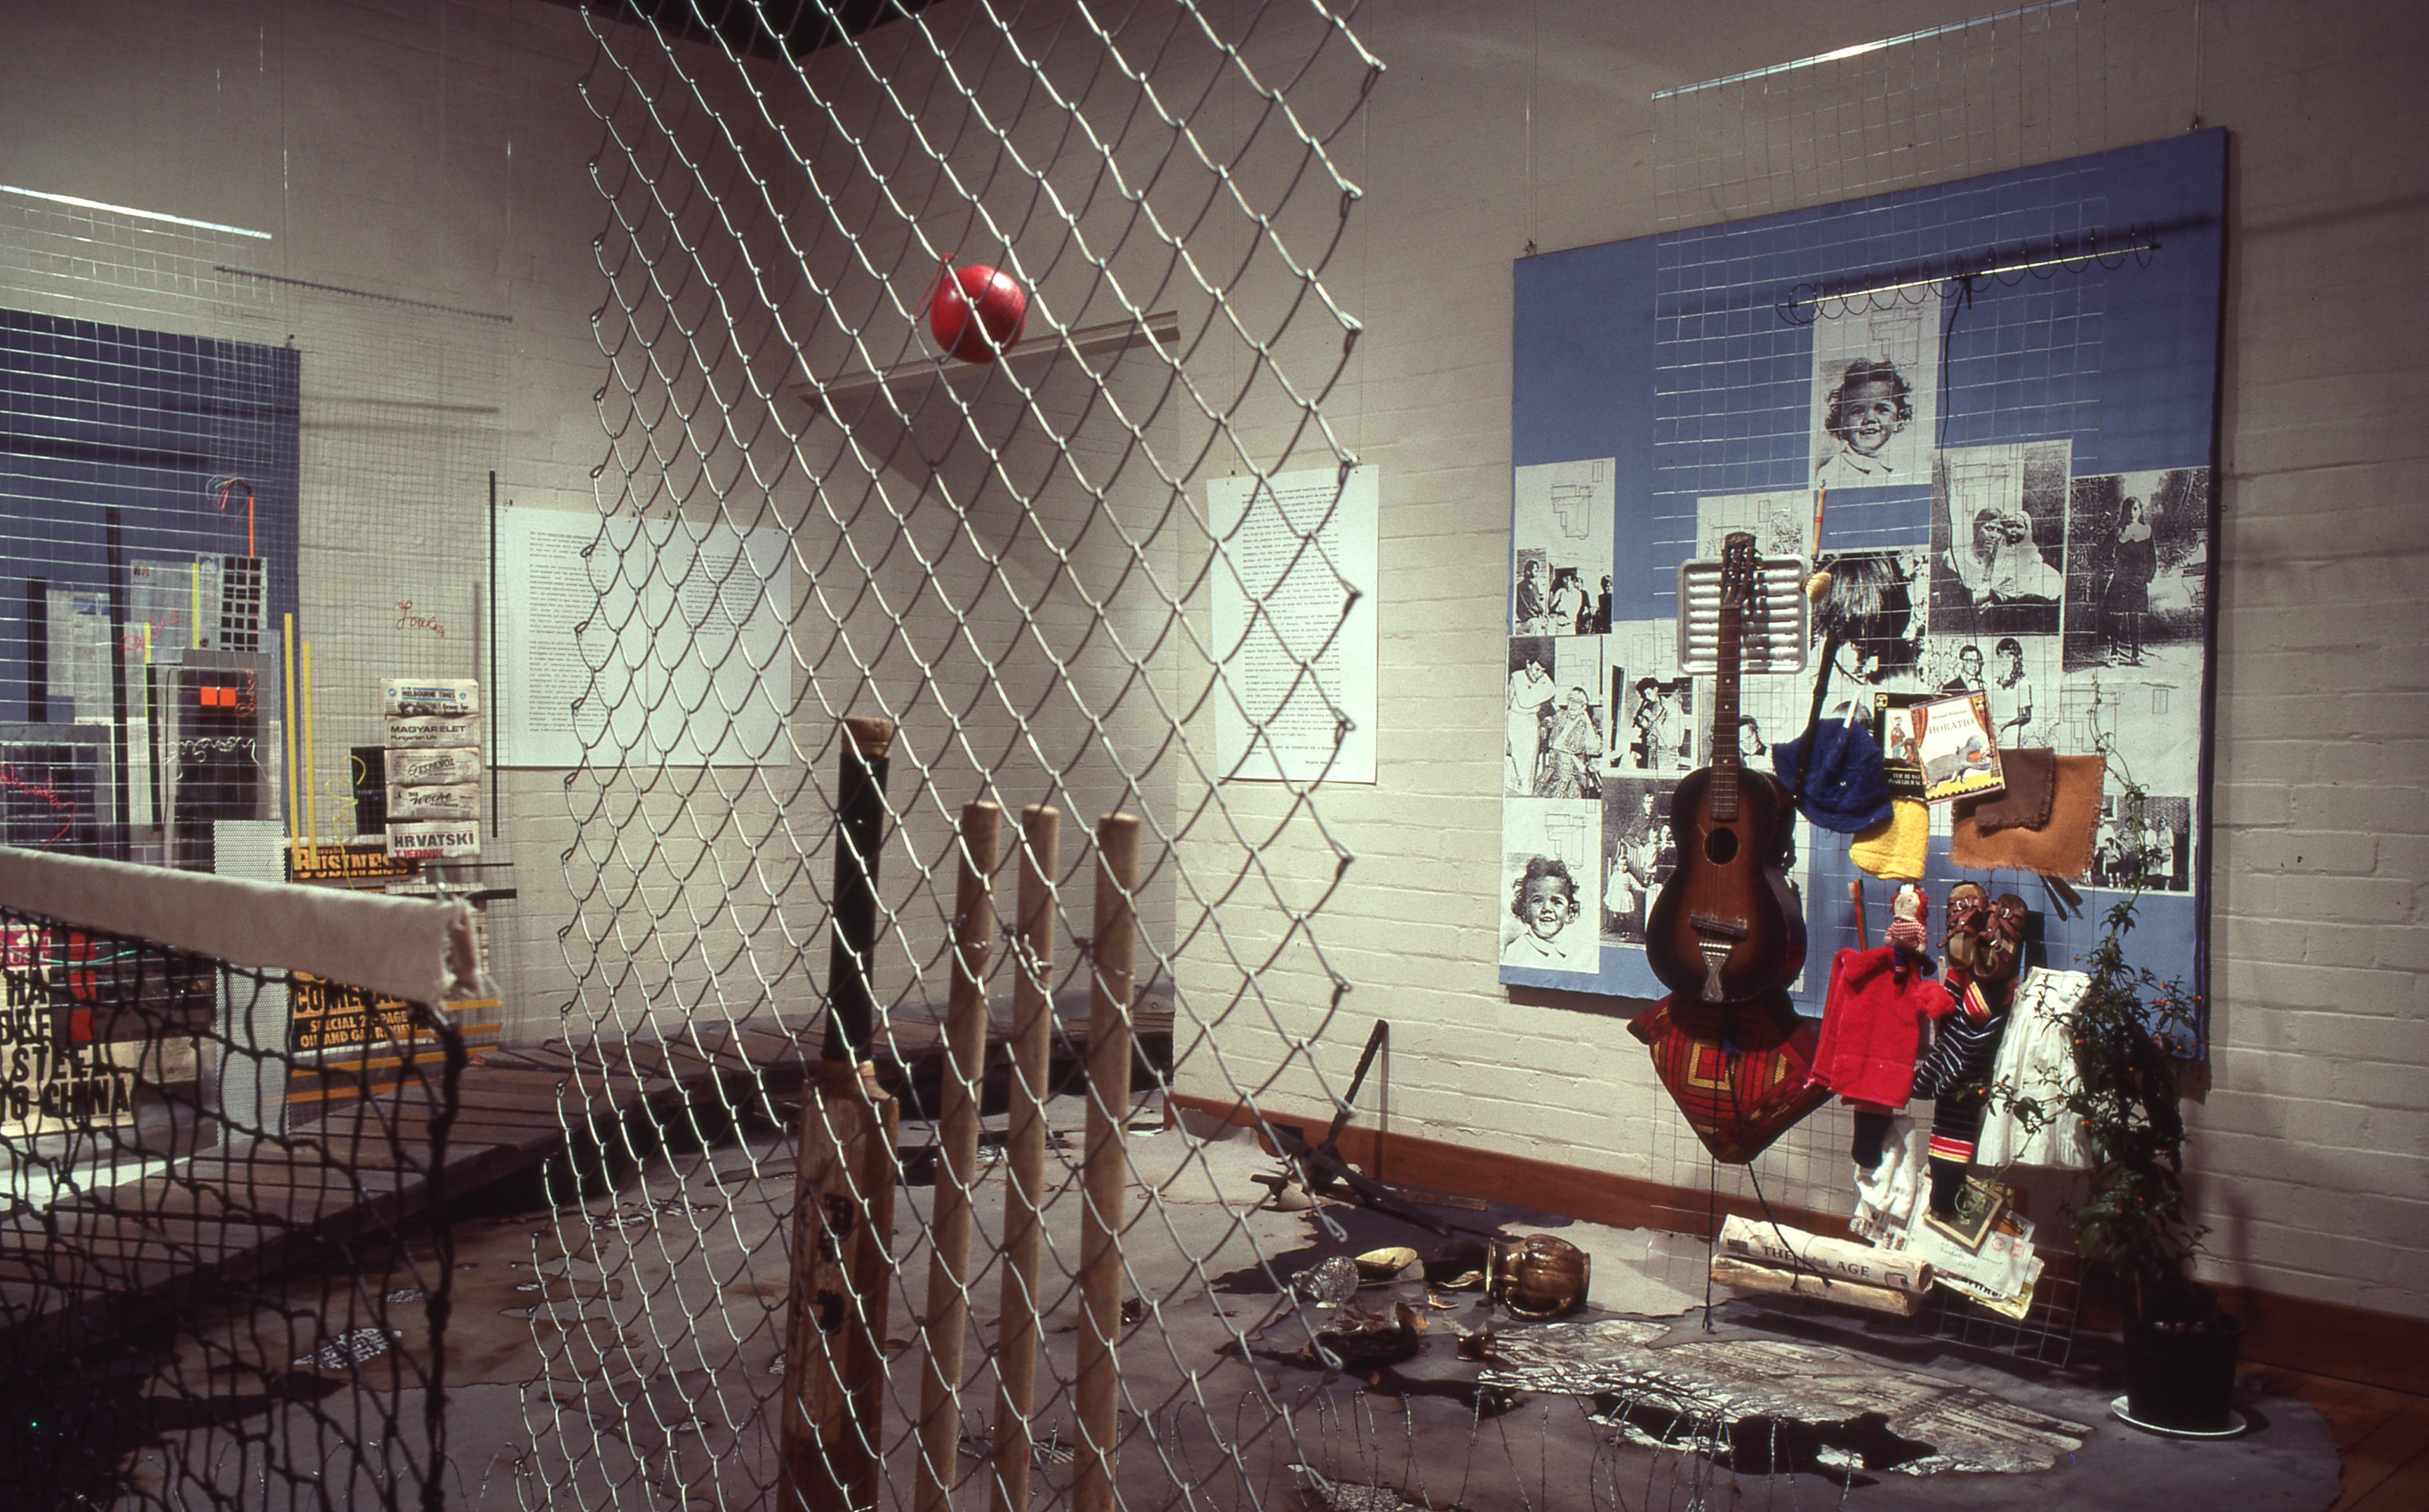 idg_archive_1985_peace_and_nuclear_war_in_the_australian_landscape_002_install.jpg